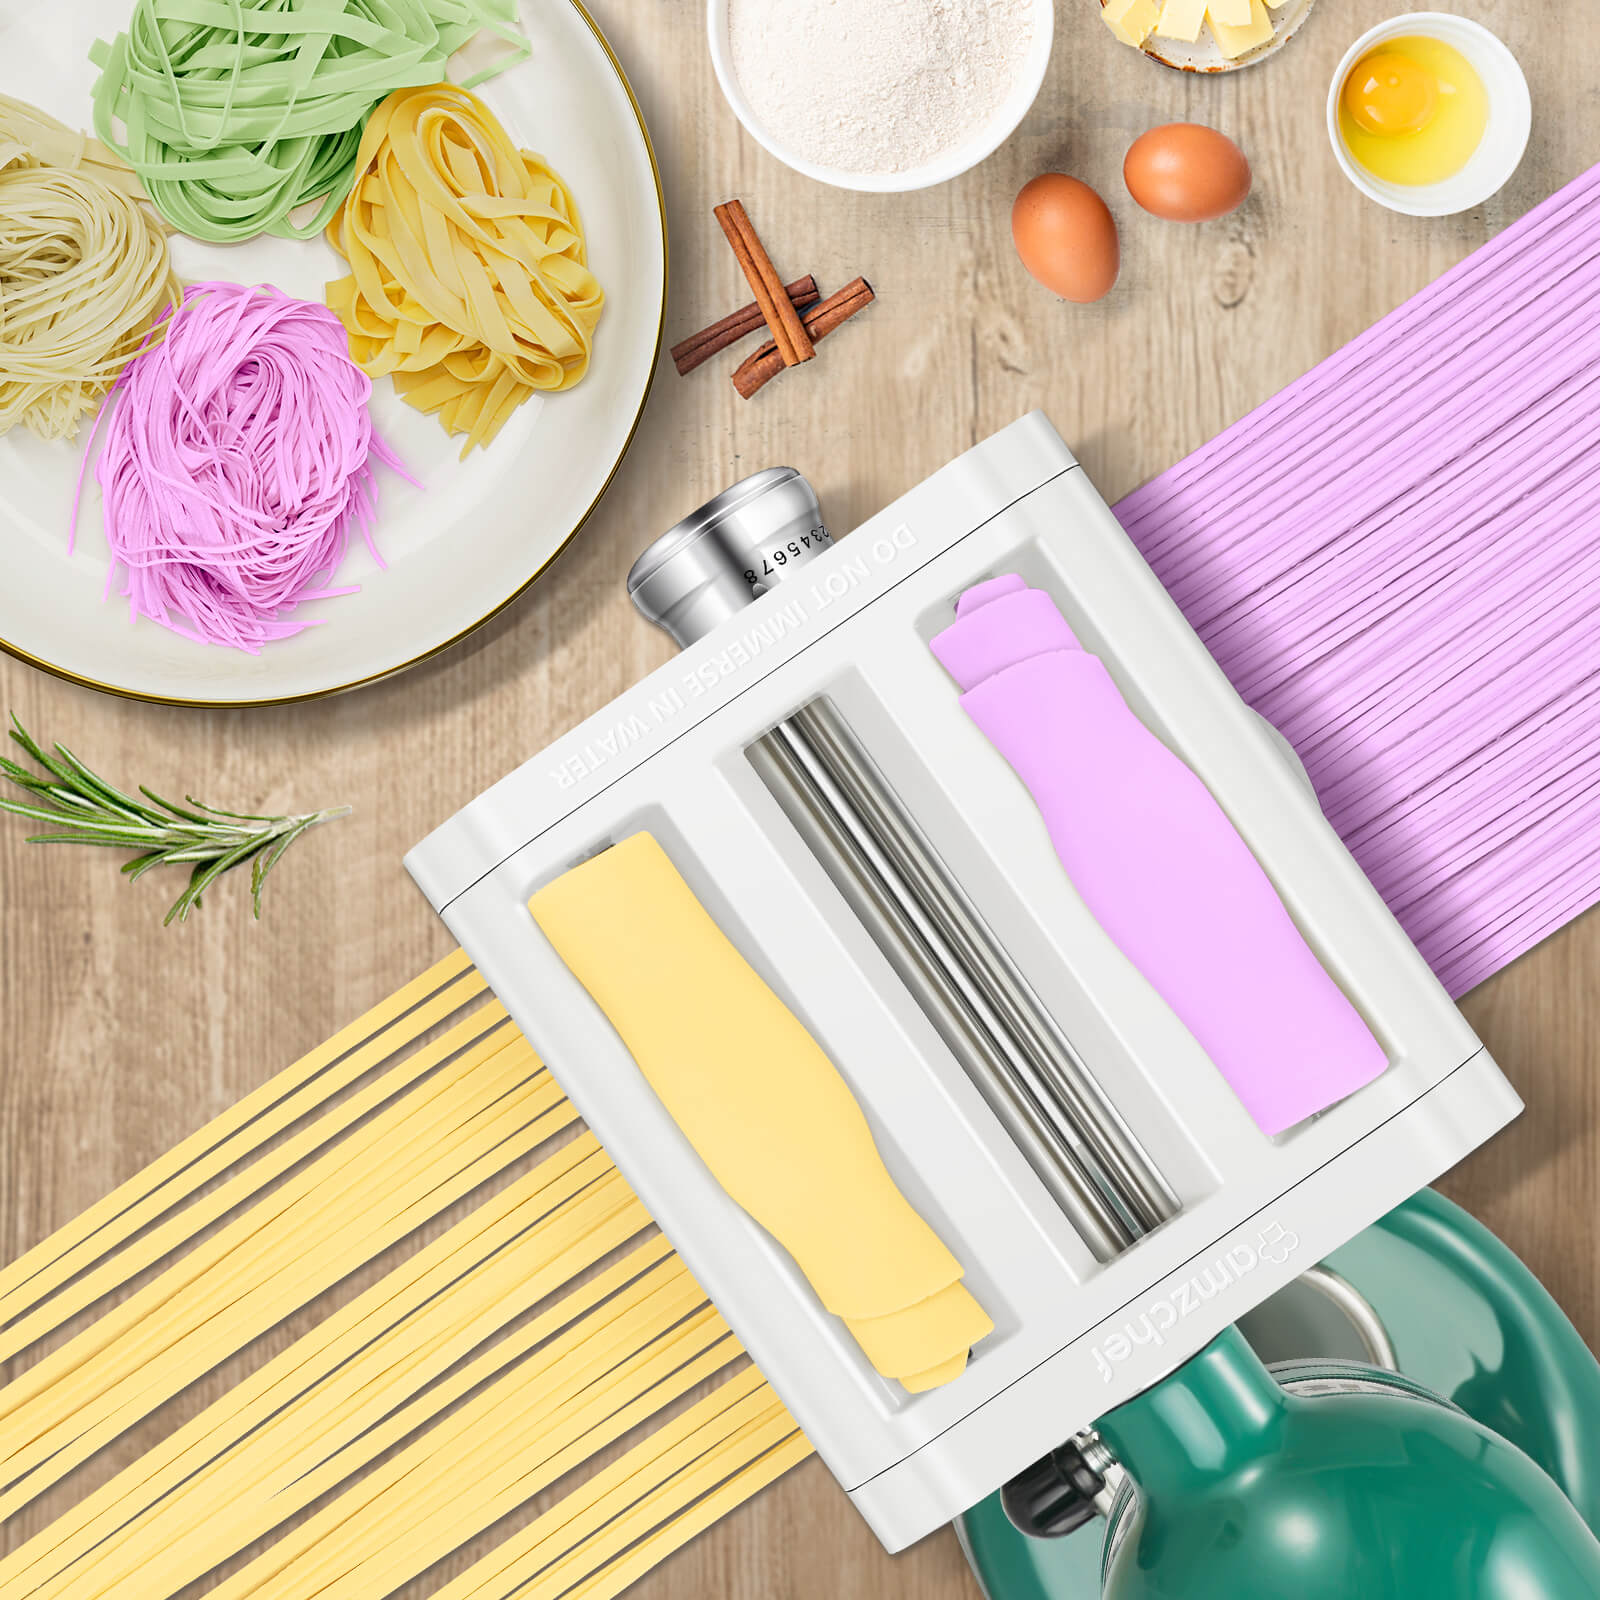 https://cdn.shopify.com/s/files/1/0592/2517/8292/files/Amzchef_3-in-1_Pasta_Maker_Attachments_Set_for_Kitchenaid_Mixers_8.jpg?v=1697441860&width=1600